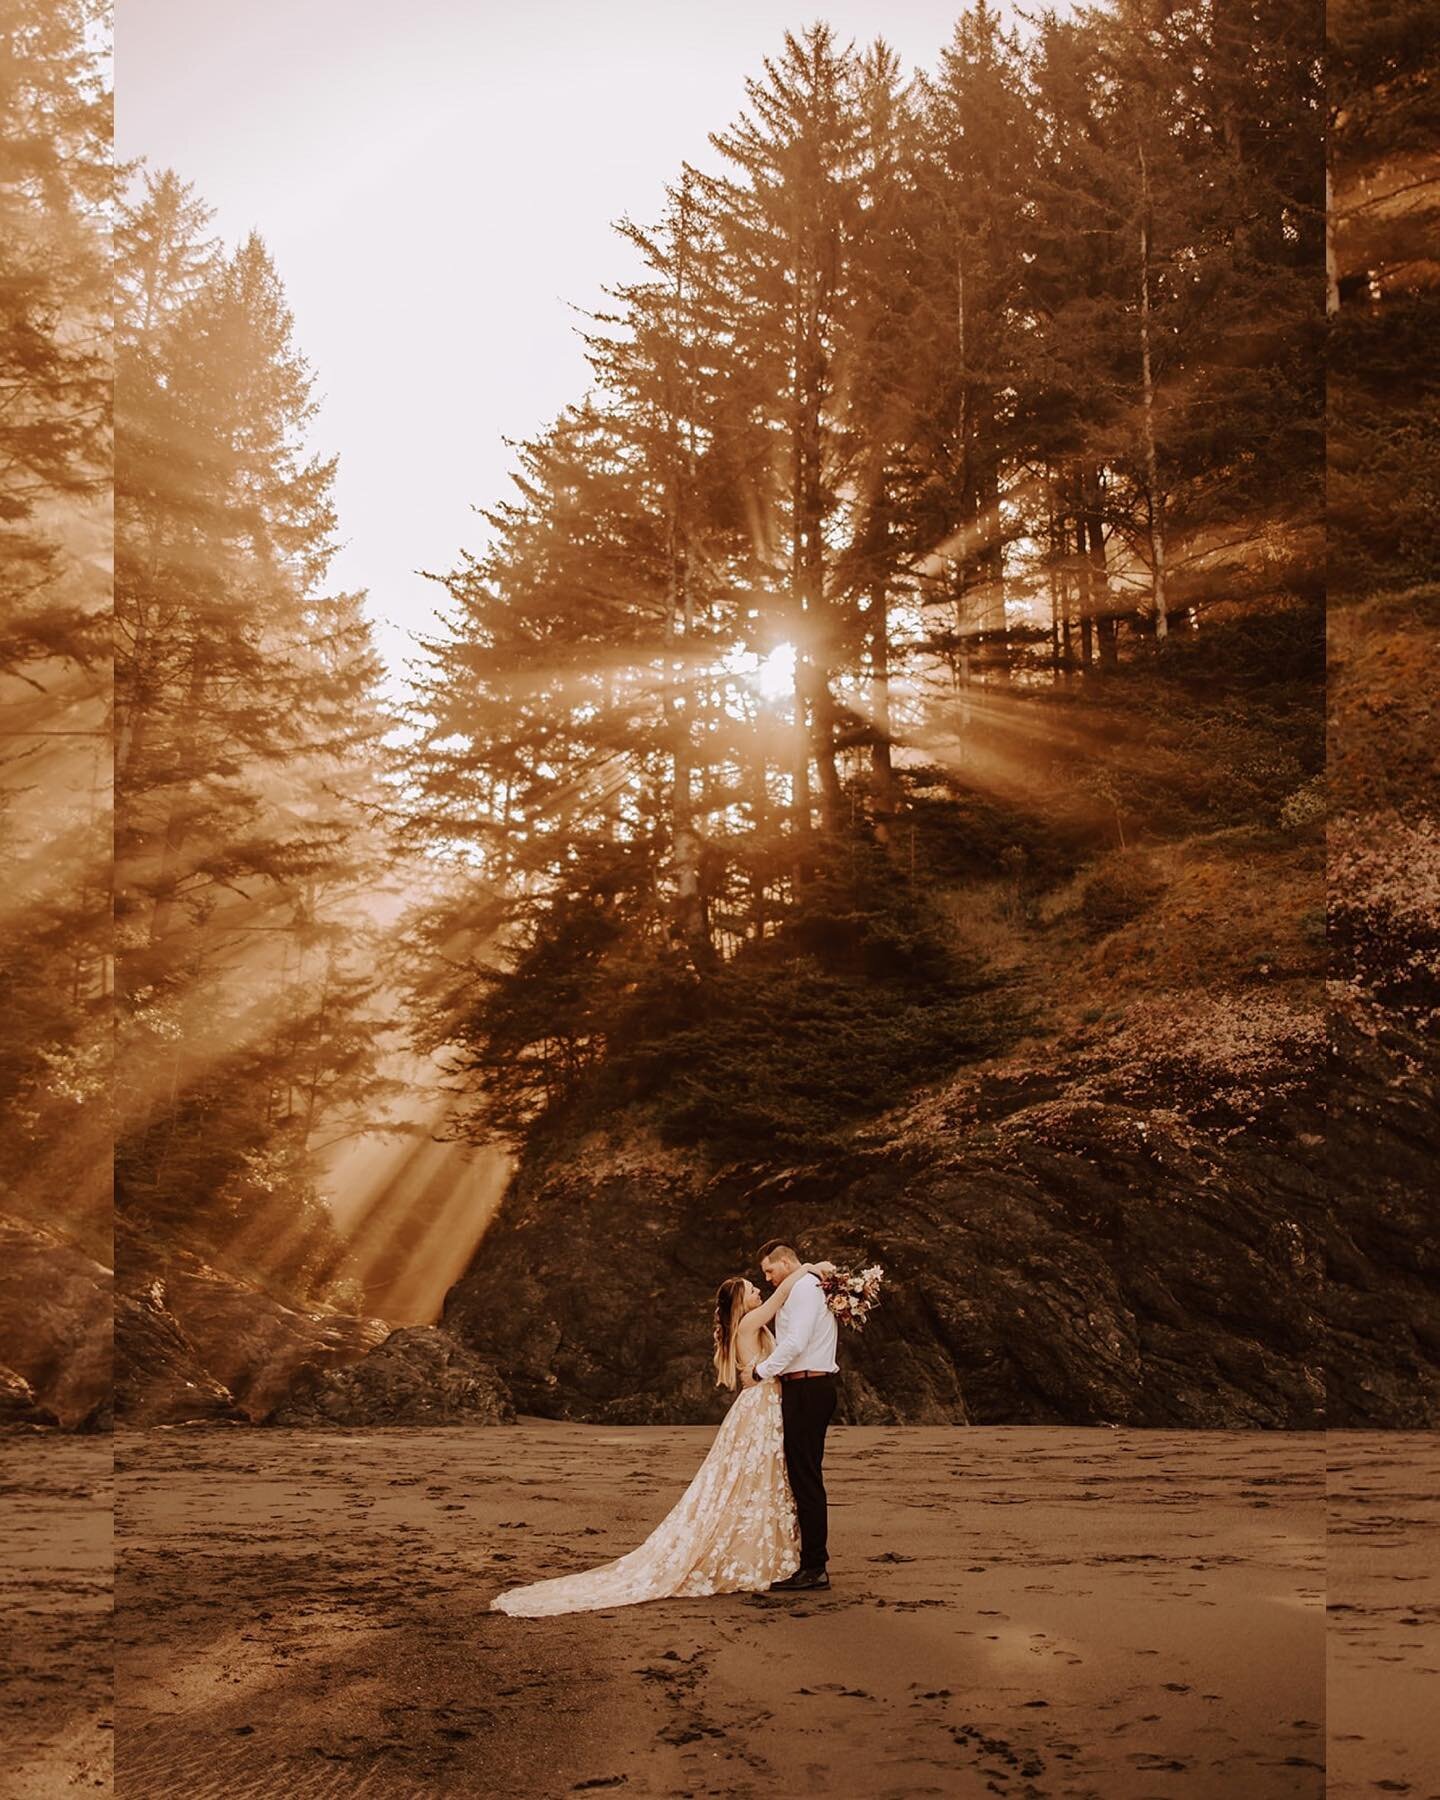 This dreamy sunrise Elopement SURPRISED US!!! ✨When we were just about to wrap up our morning shoot as we looked behind us these rays of sunlight started to shine through the trees! We quickly turned around to take in the moment and capture the beaut